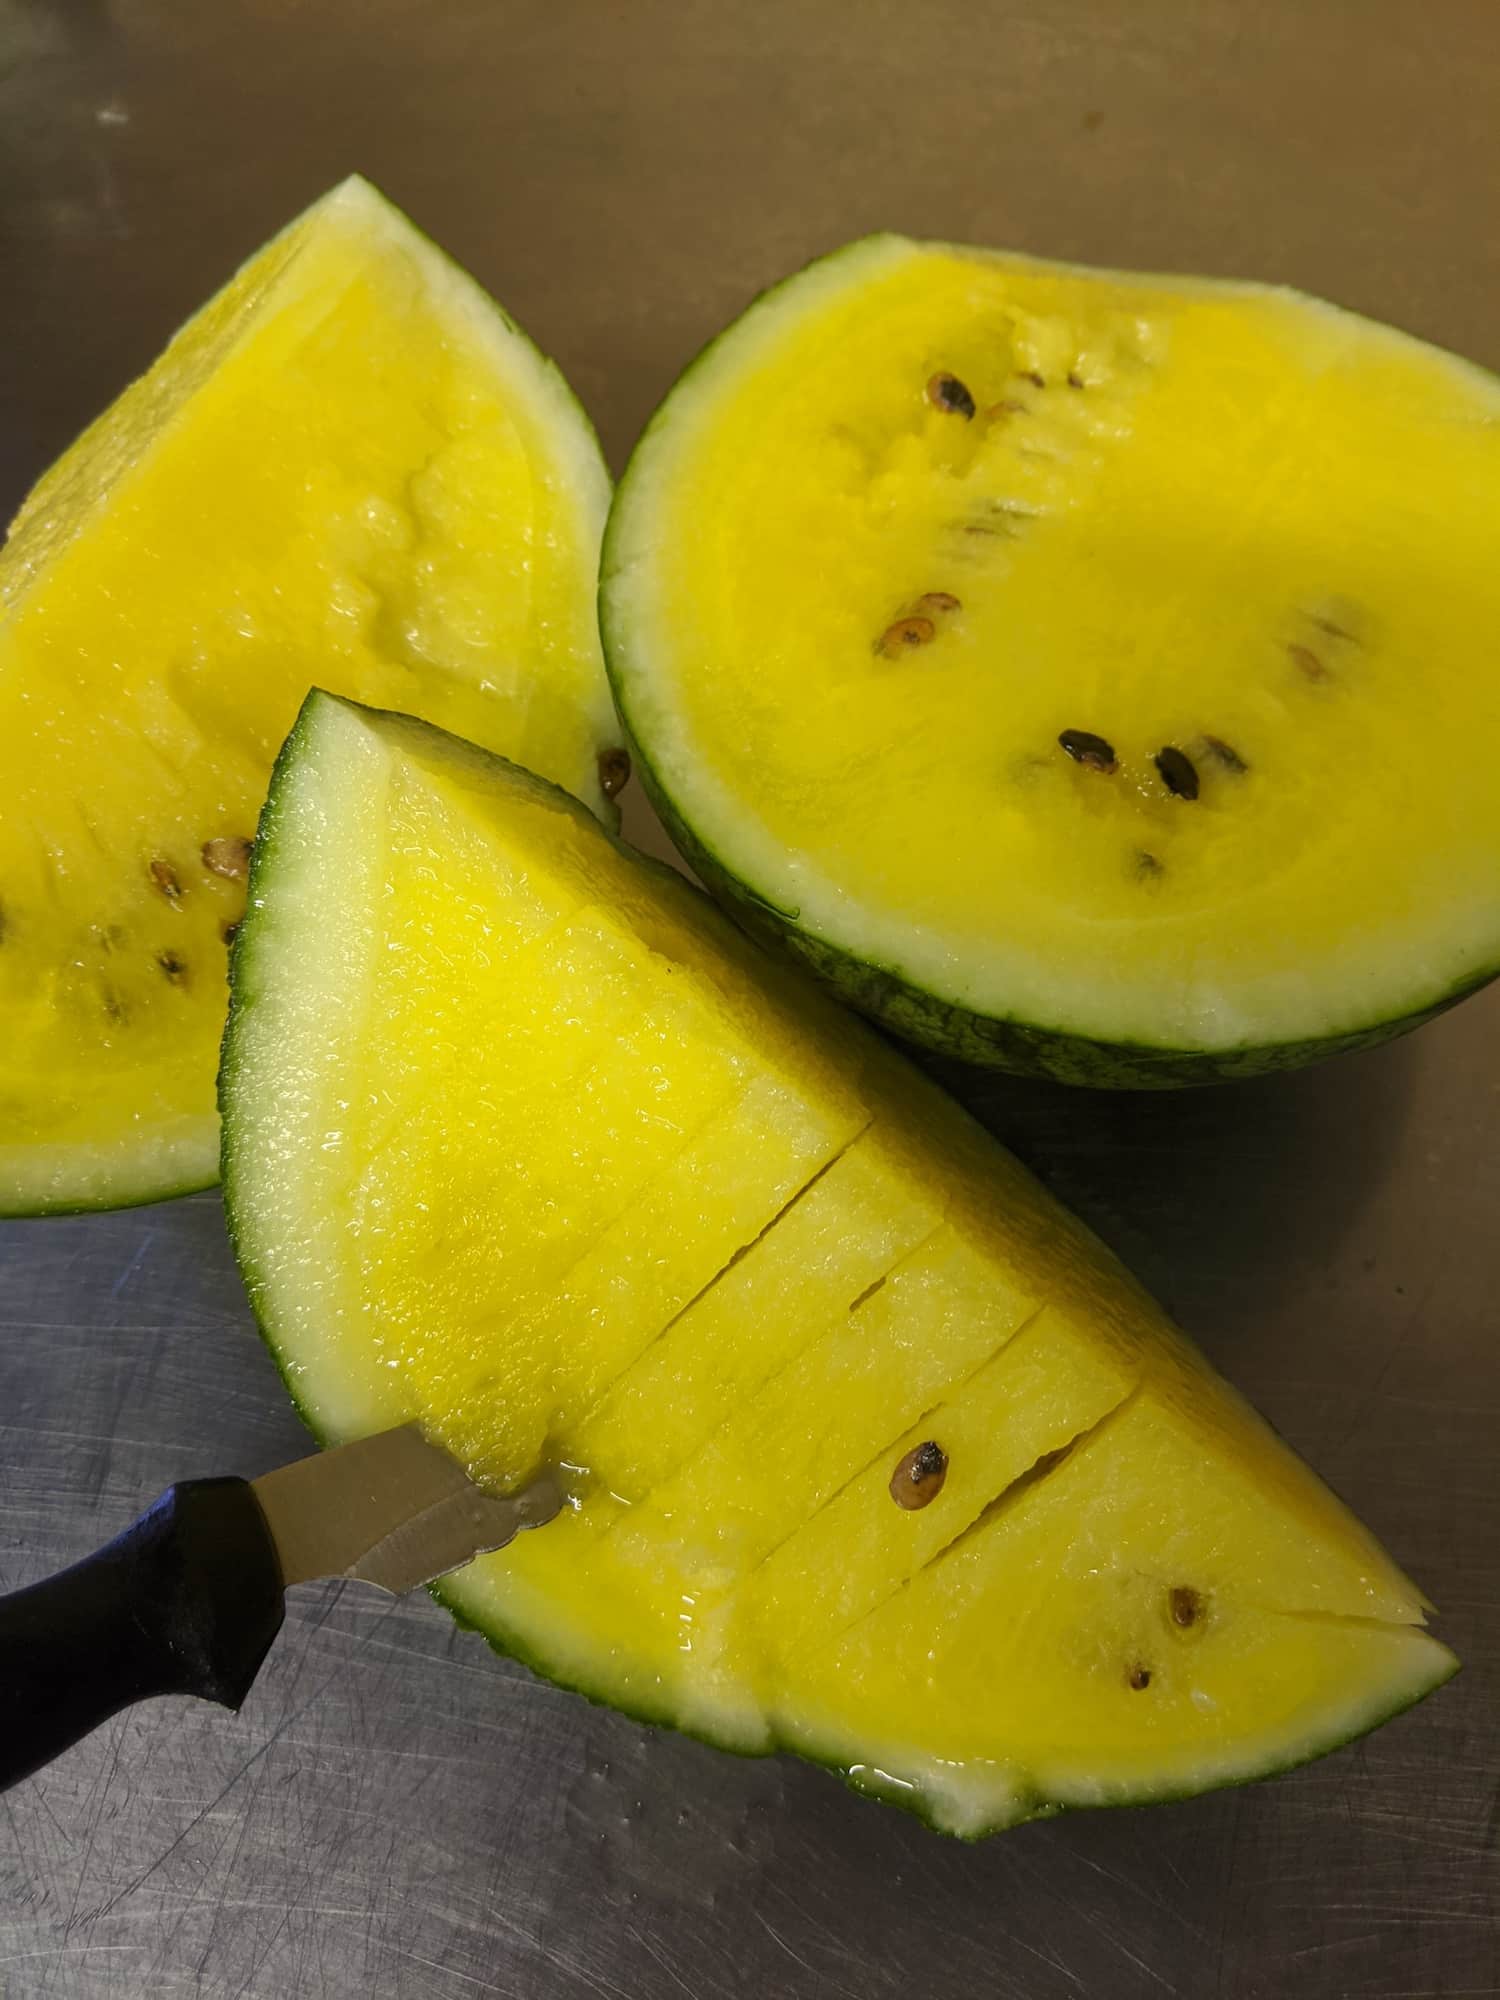 Yellow watermelons